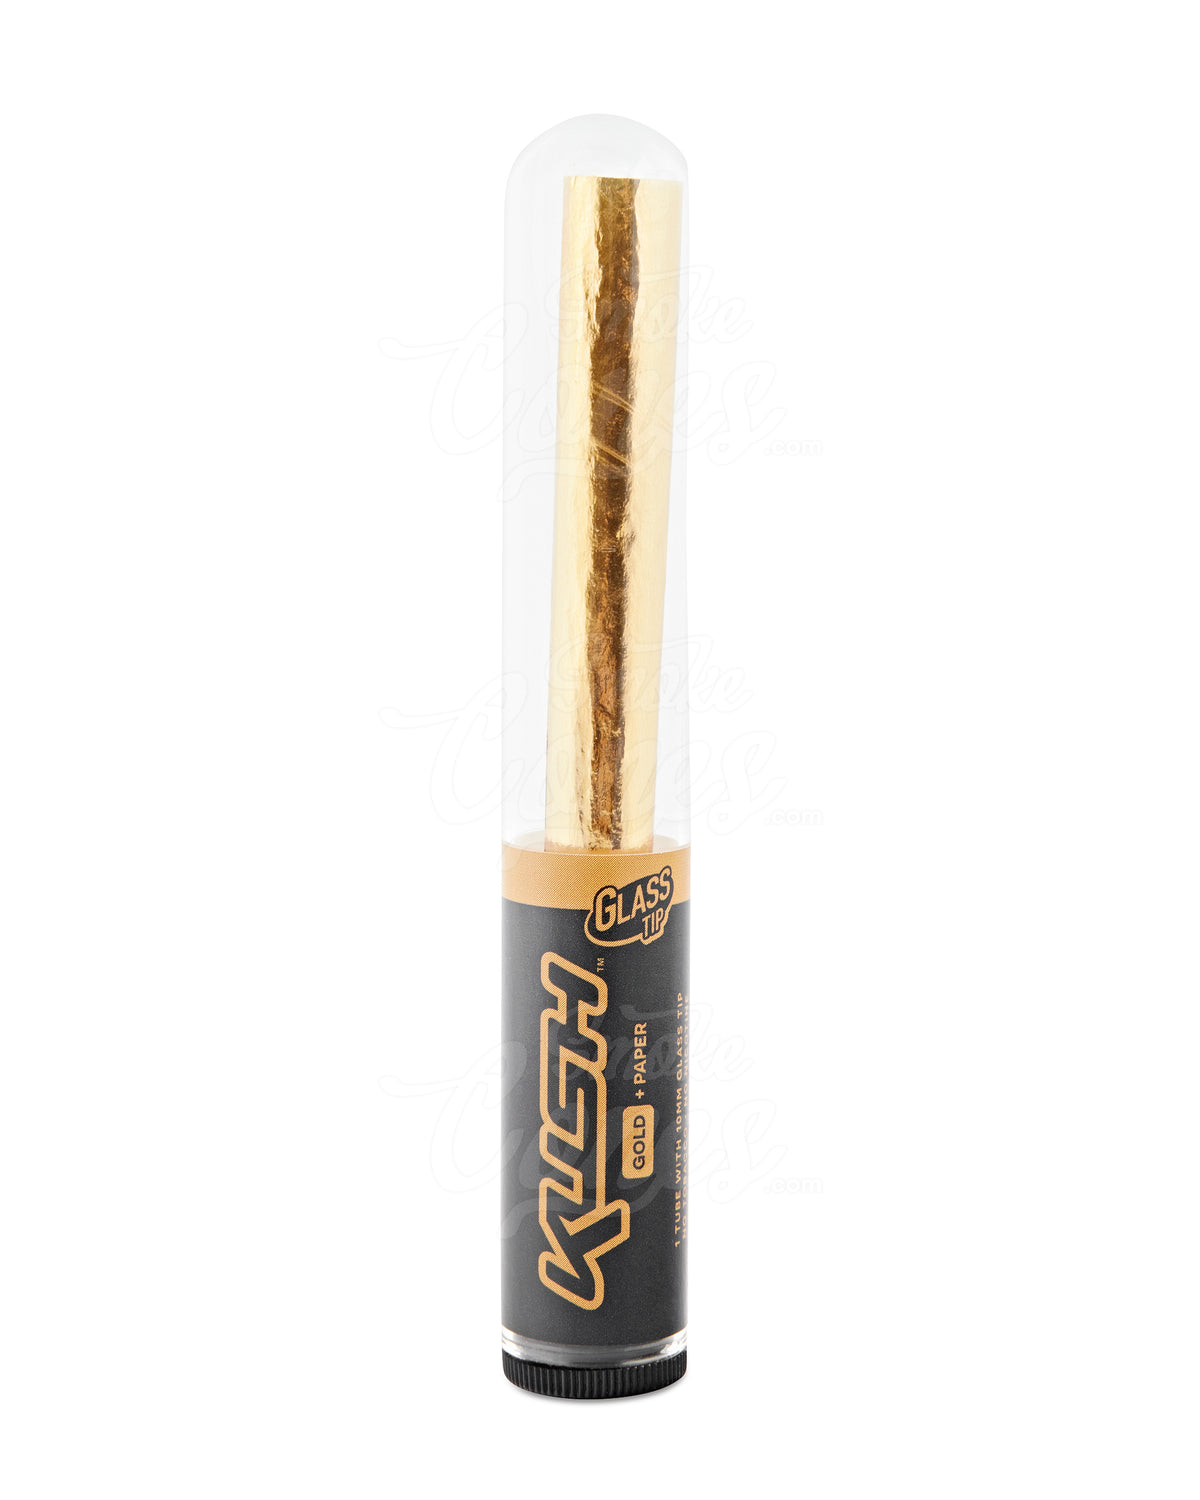 Kush 109mm King Size 24K Gold Paper Pre Rolled Cones W/ Glass Filter Tip 8/Box